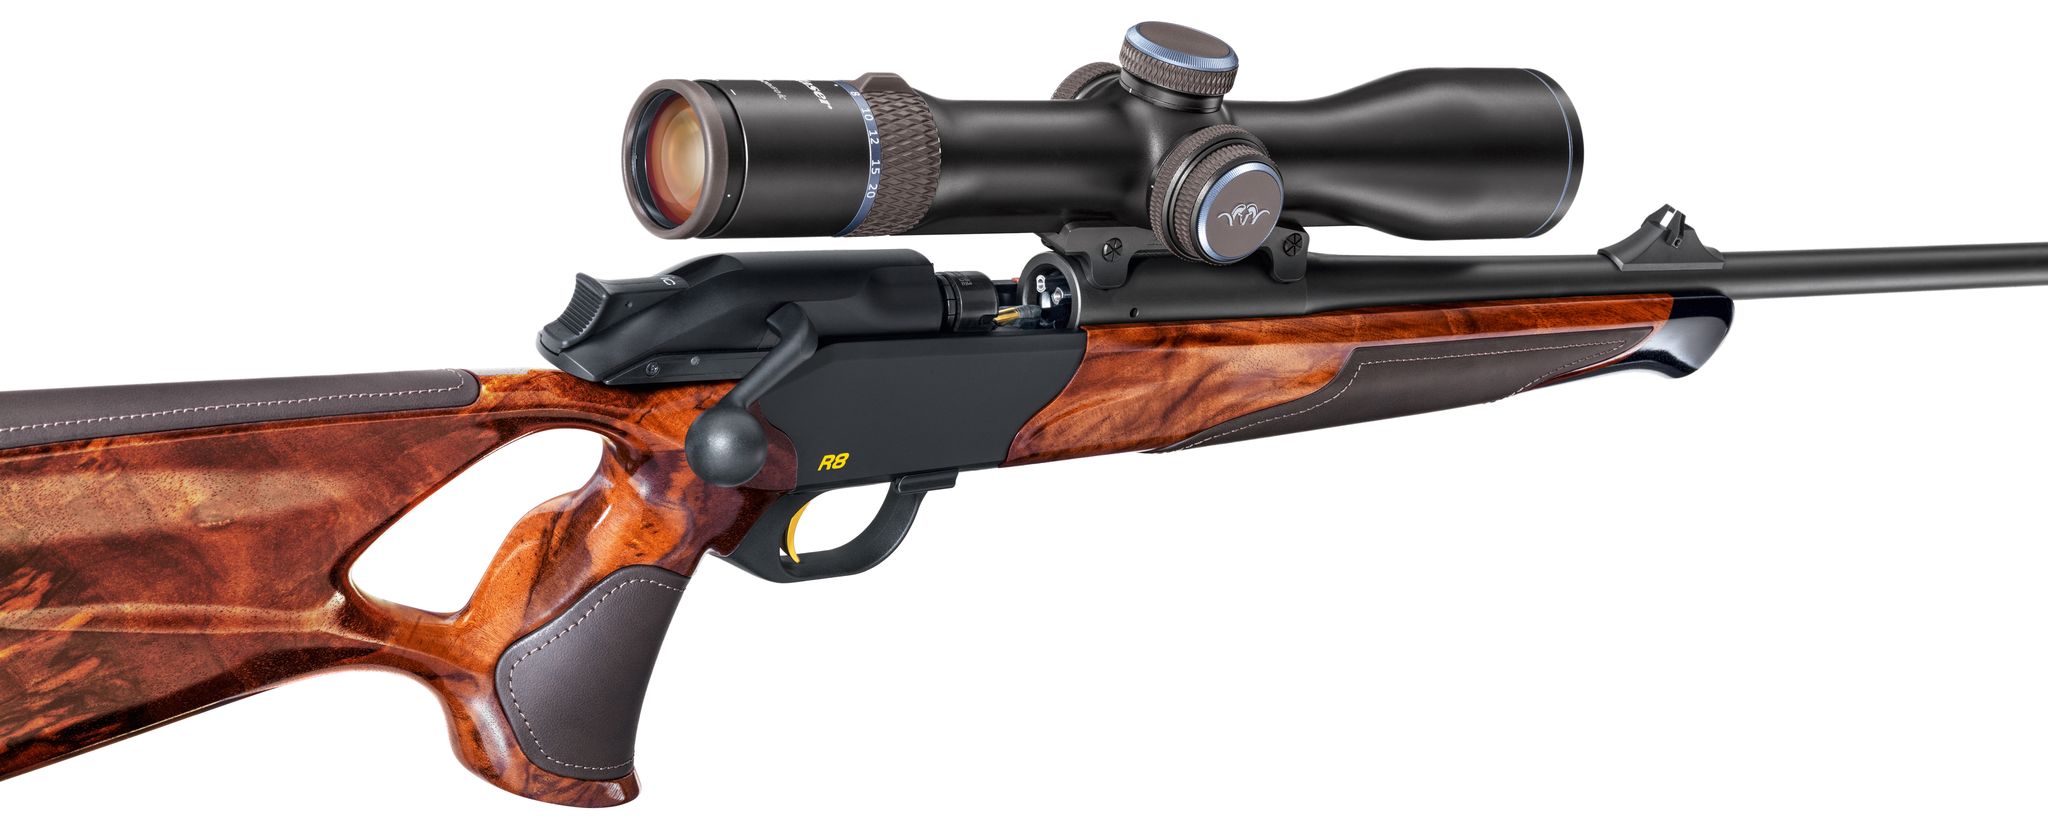 Blaser's New R8 Rimfire Conversion Kits - From Big Game to Varmint